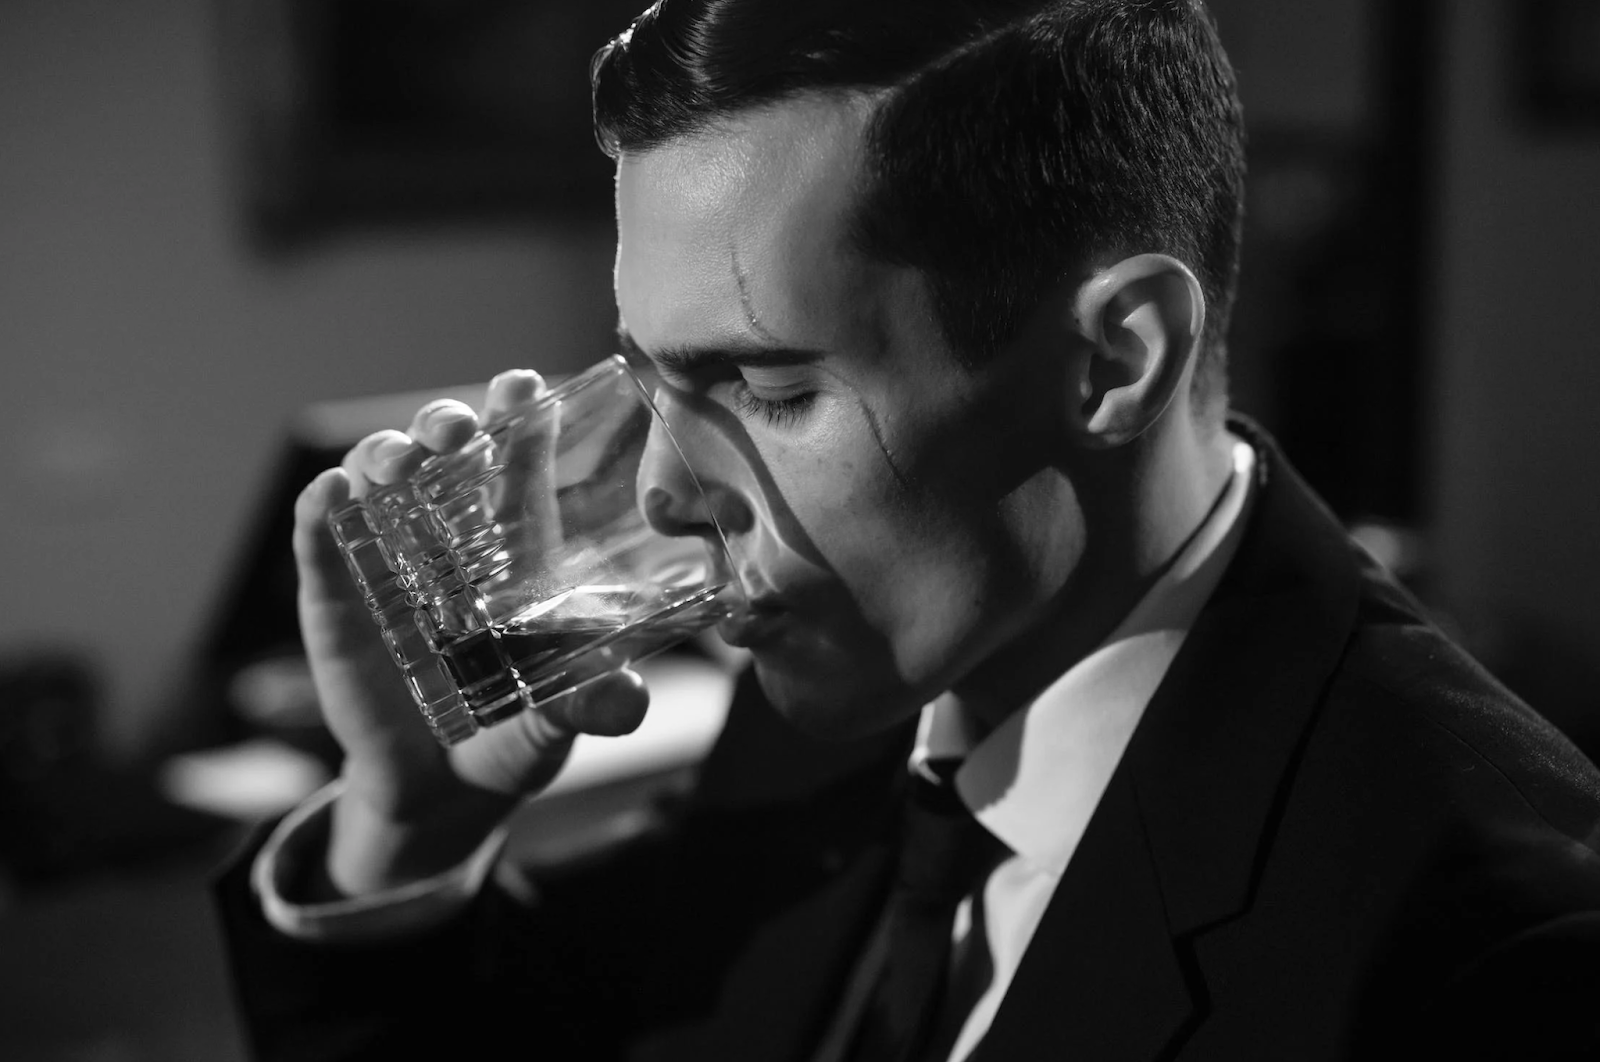 A black and white photo of a man drinking a glass of whisky.